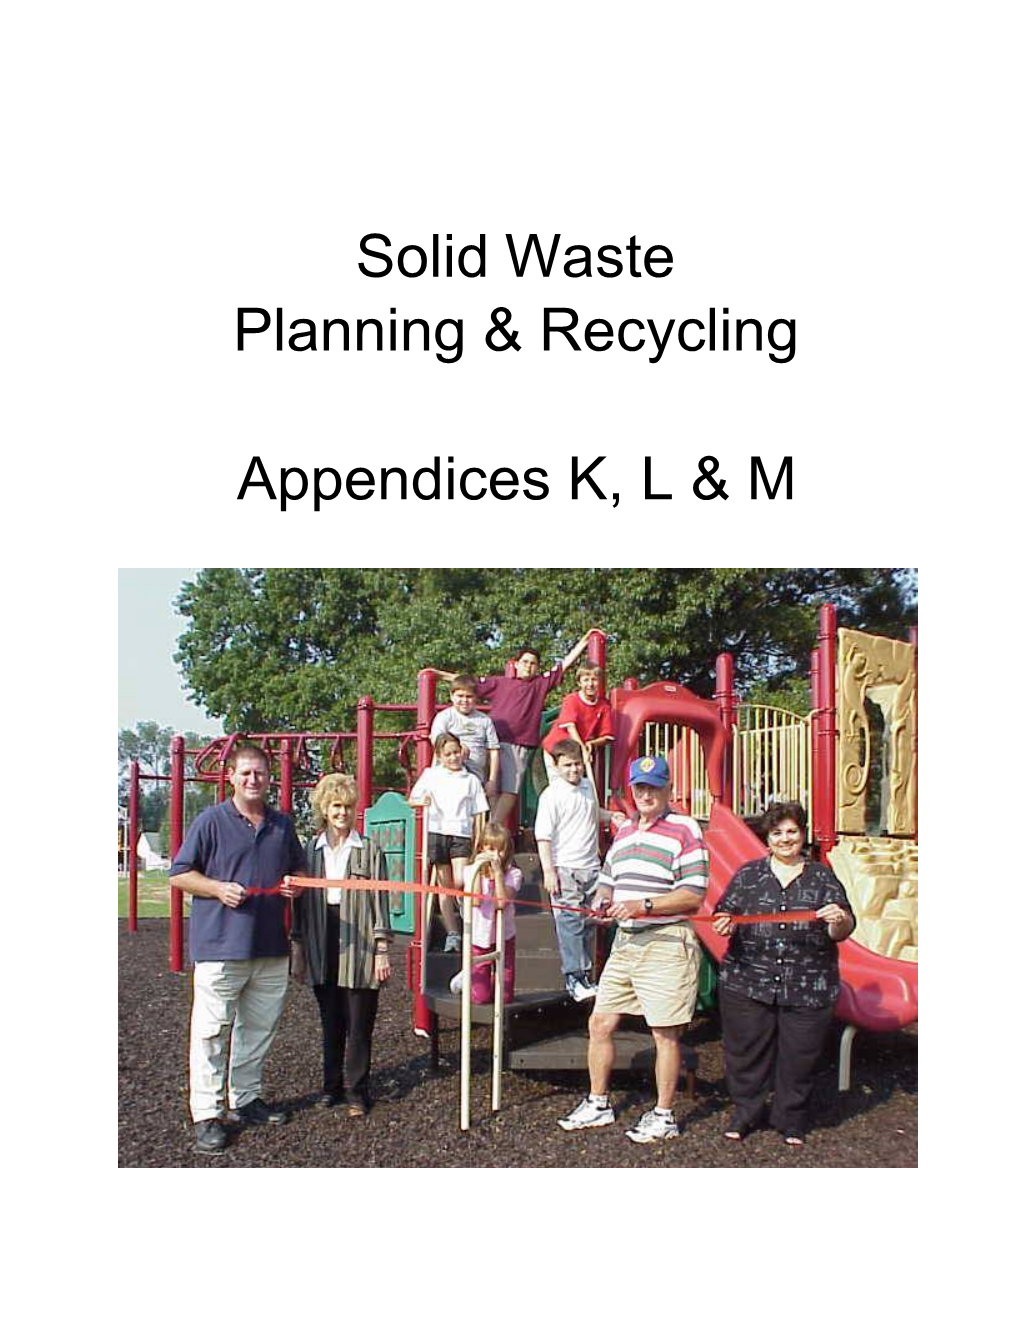 Solid Waste Planning & Recycling Appendices K, L & M